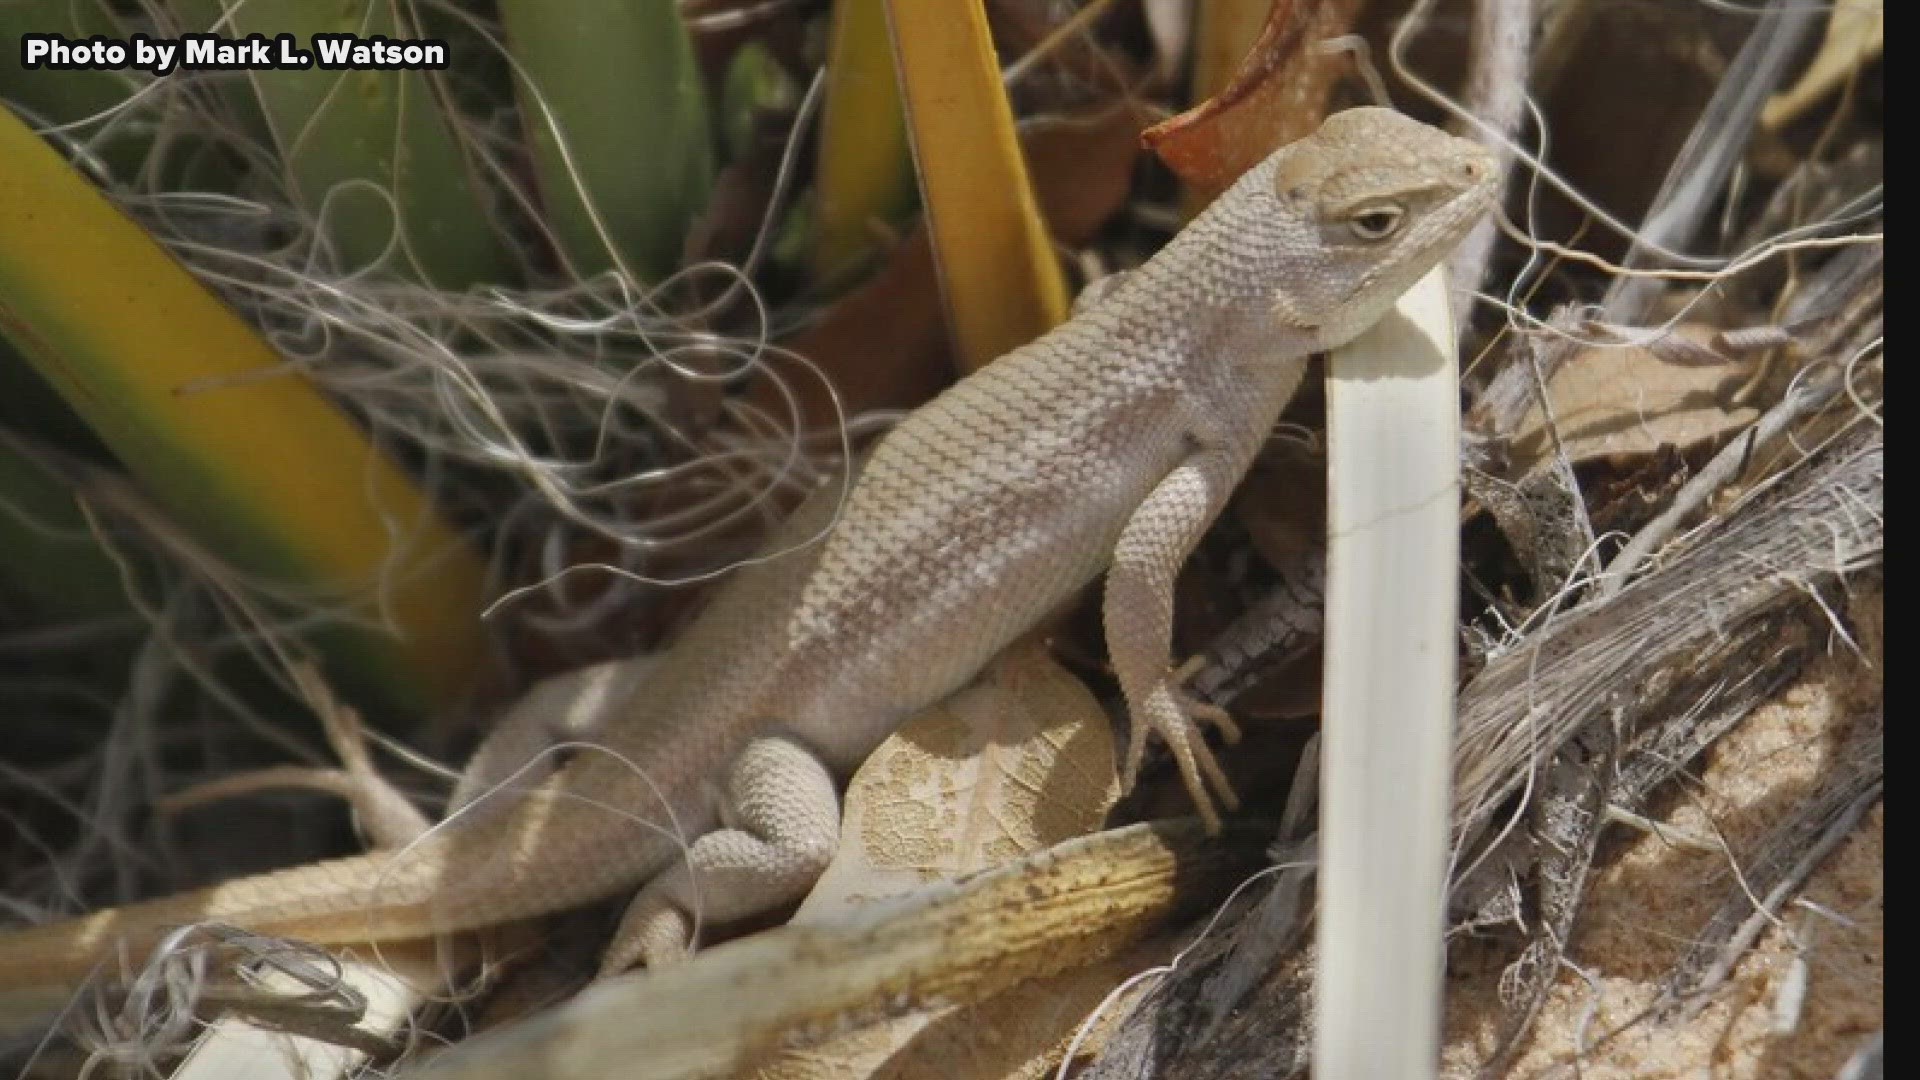 Pfluger said adding the lizard to the endangered species list has the potential to slow down the oil and gas industry.